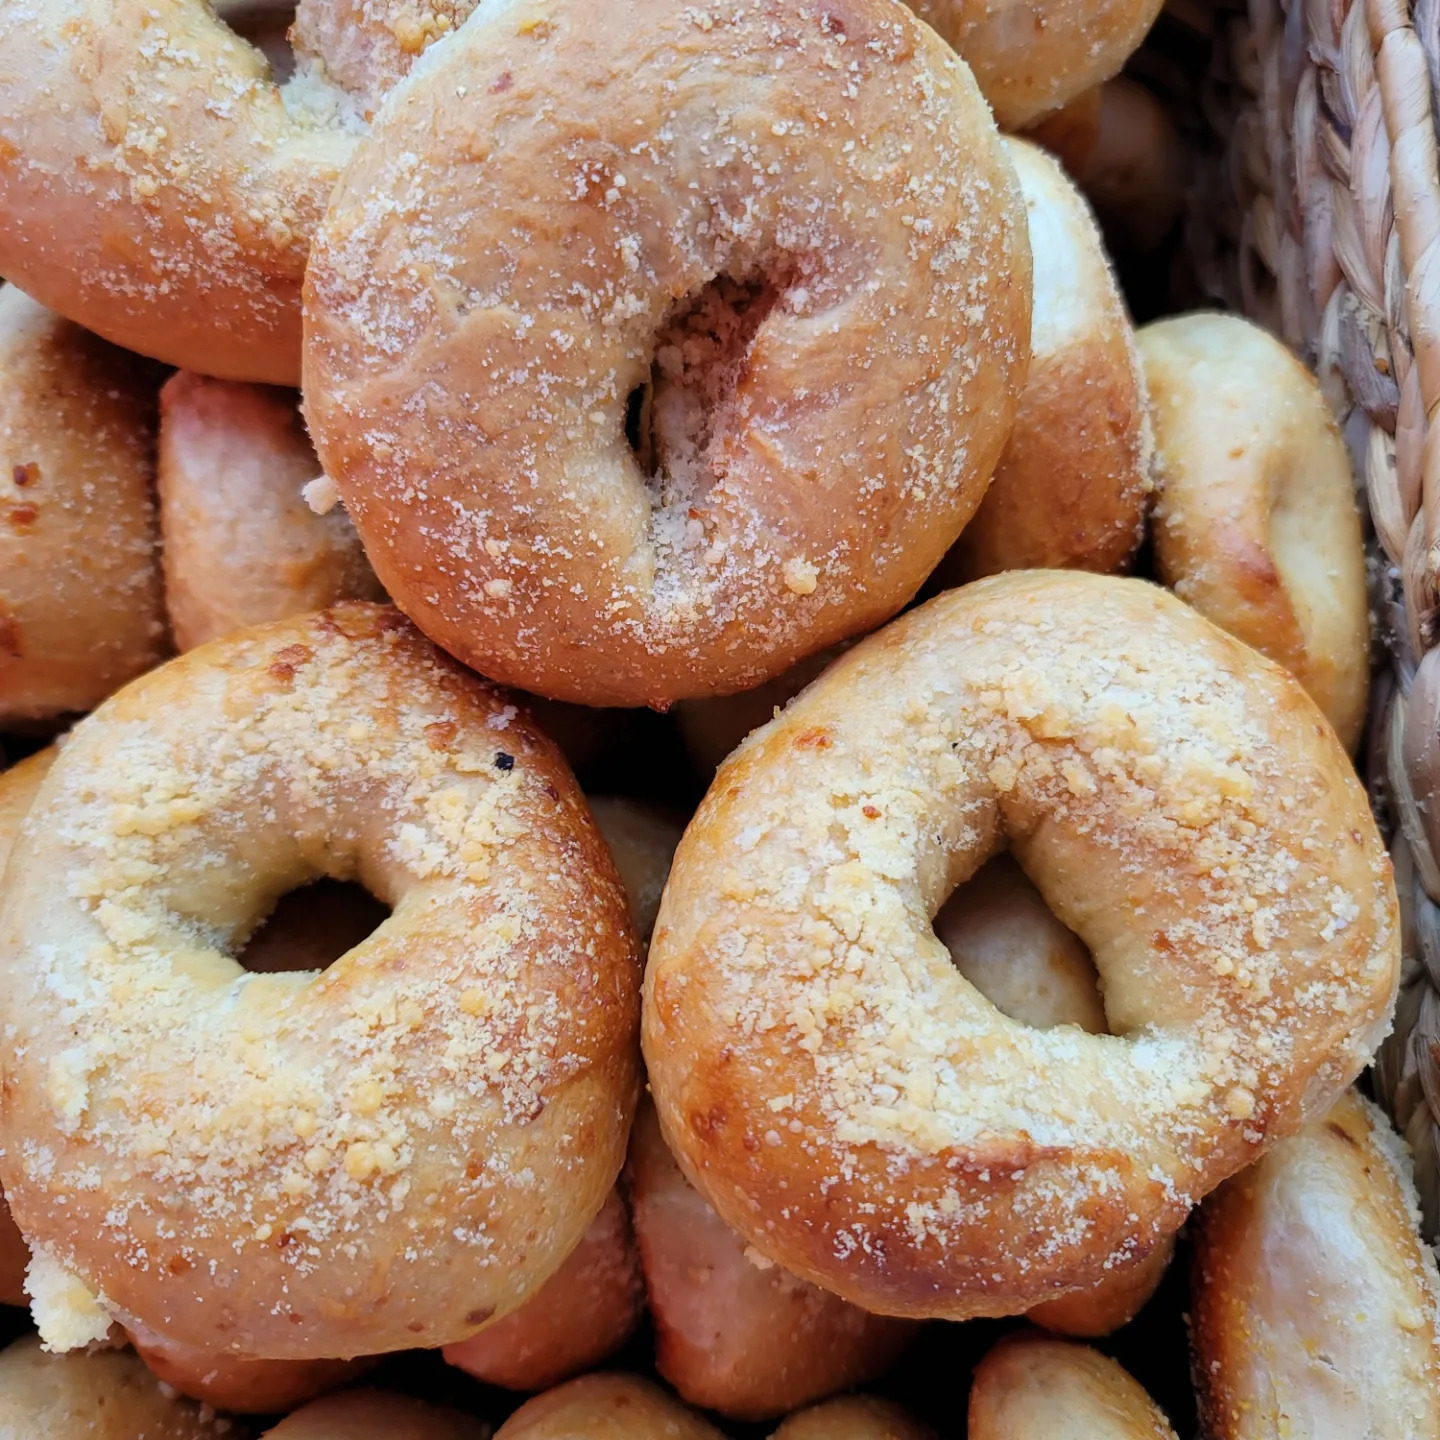 Rosemary sea salt bagels from The Bronx Bagel Buggy in Chamblee, GA.